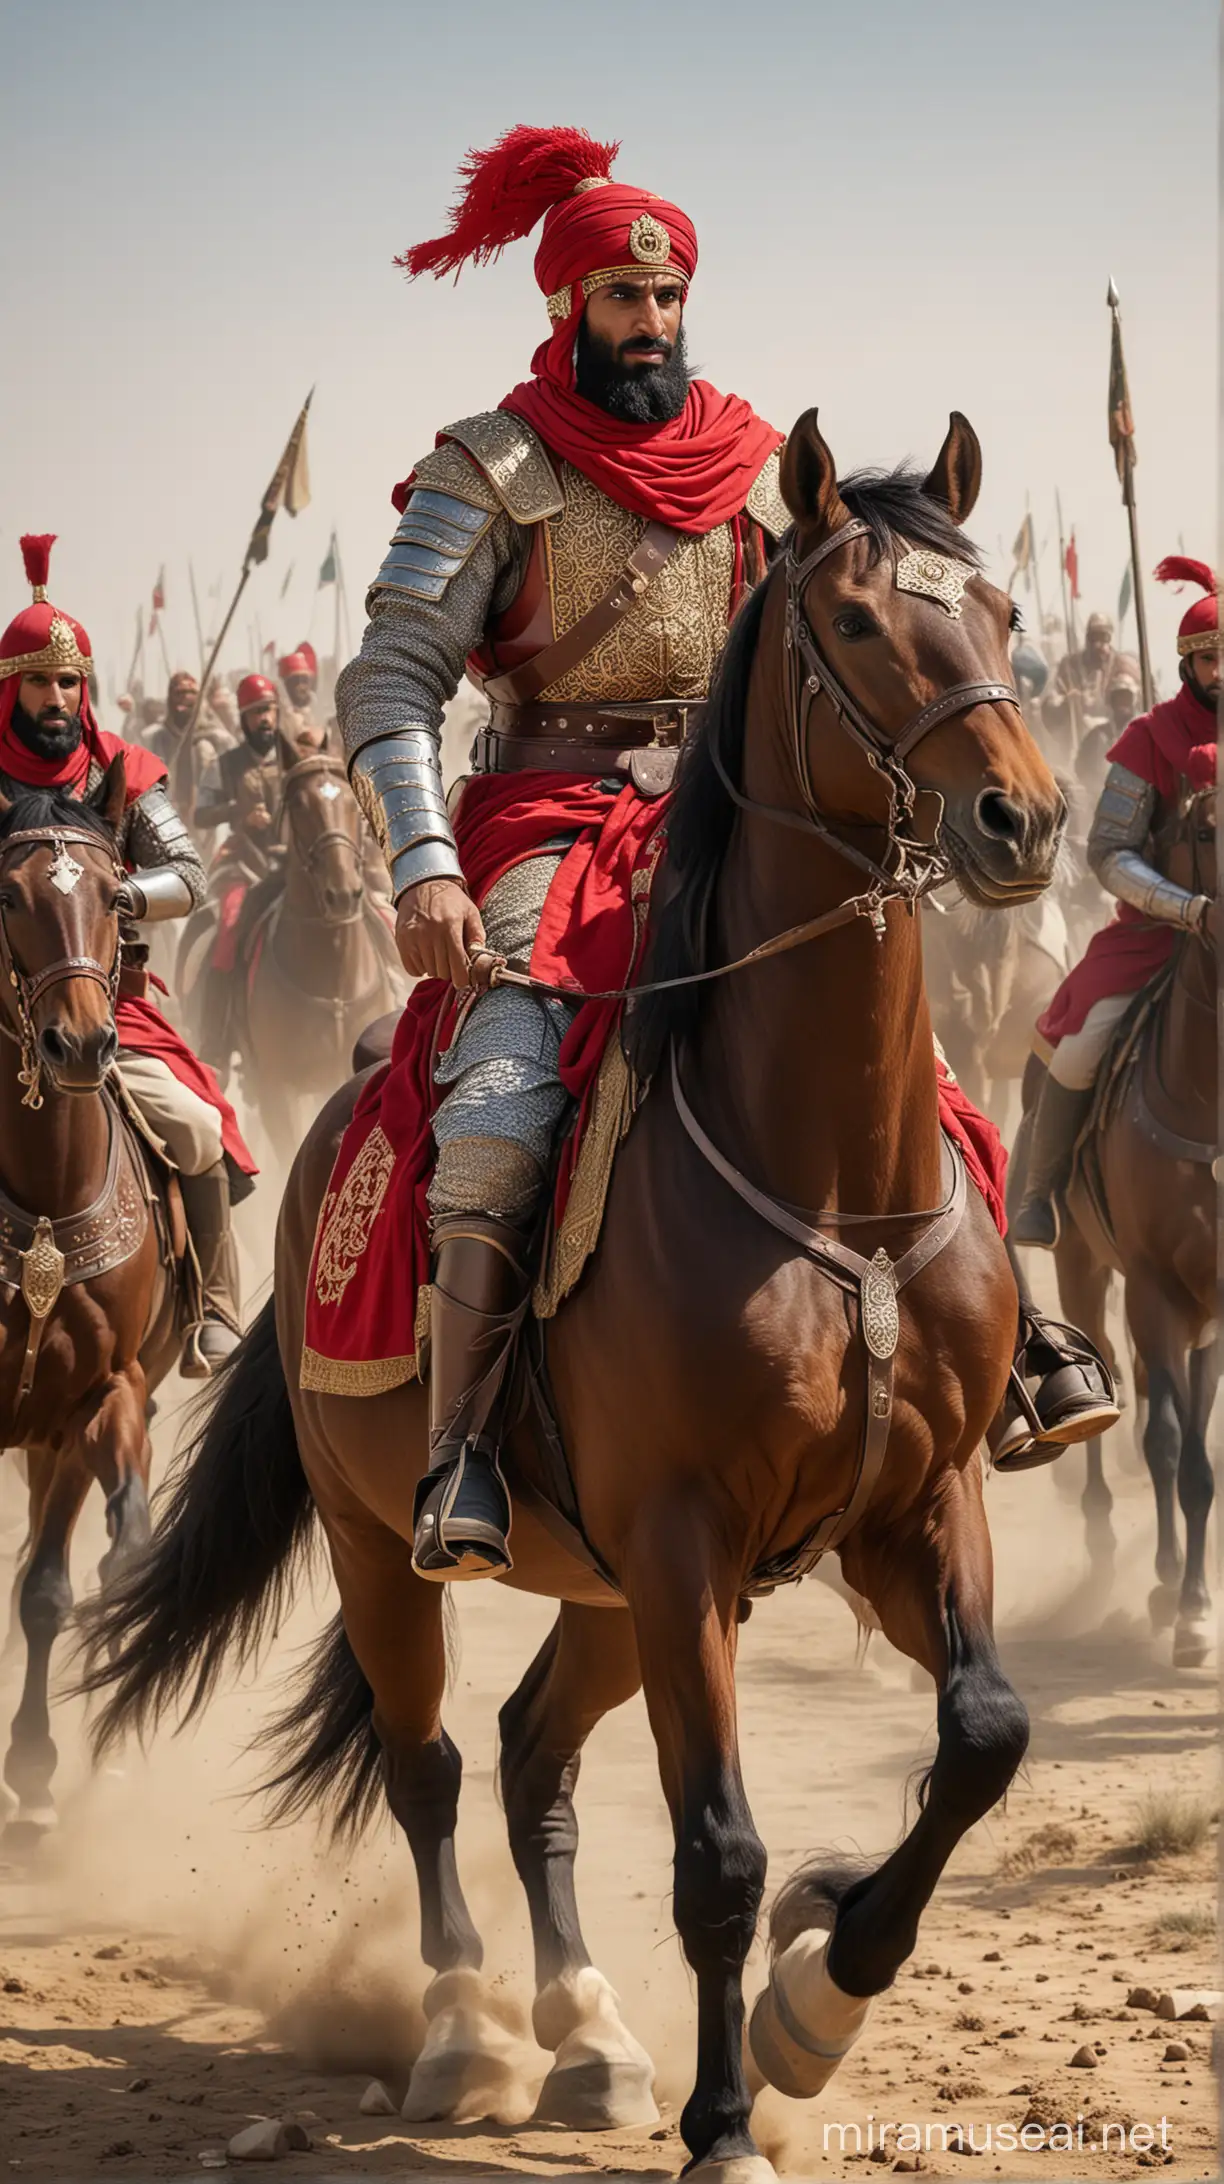 Muslim commanders, wearing red helmets and armor, are riding horses into battle